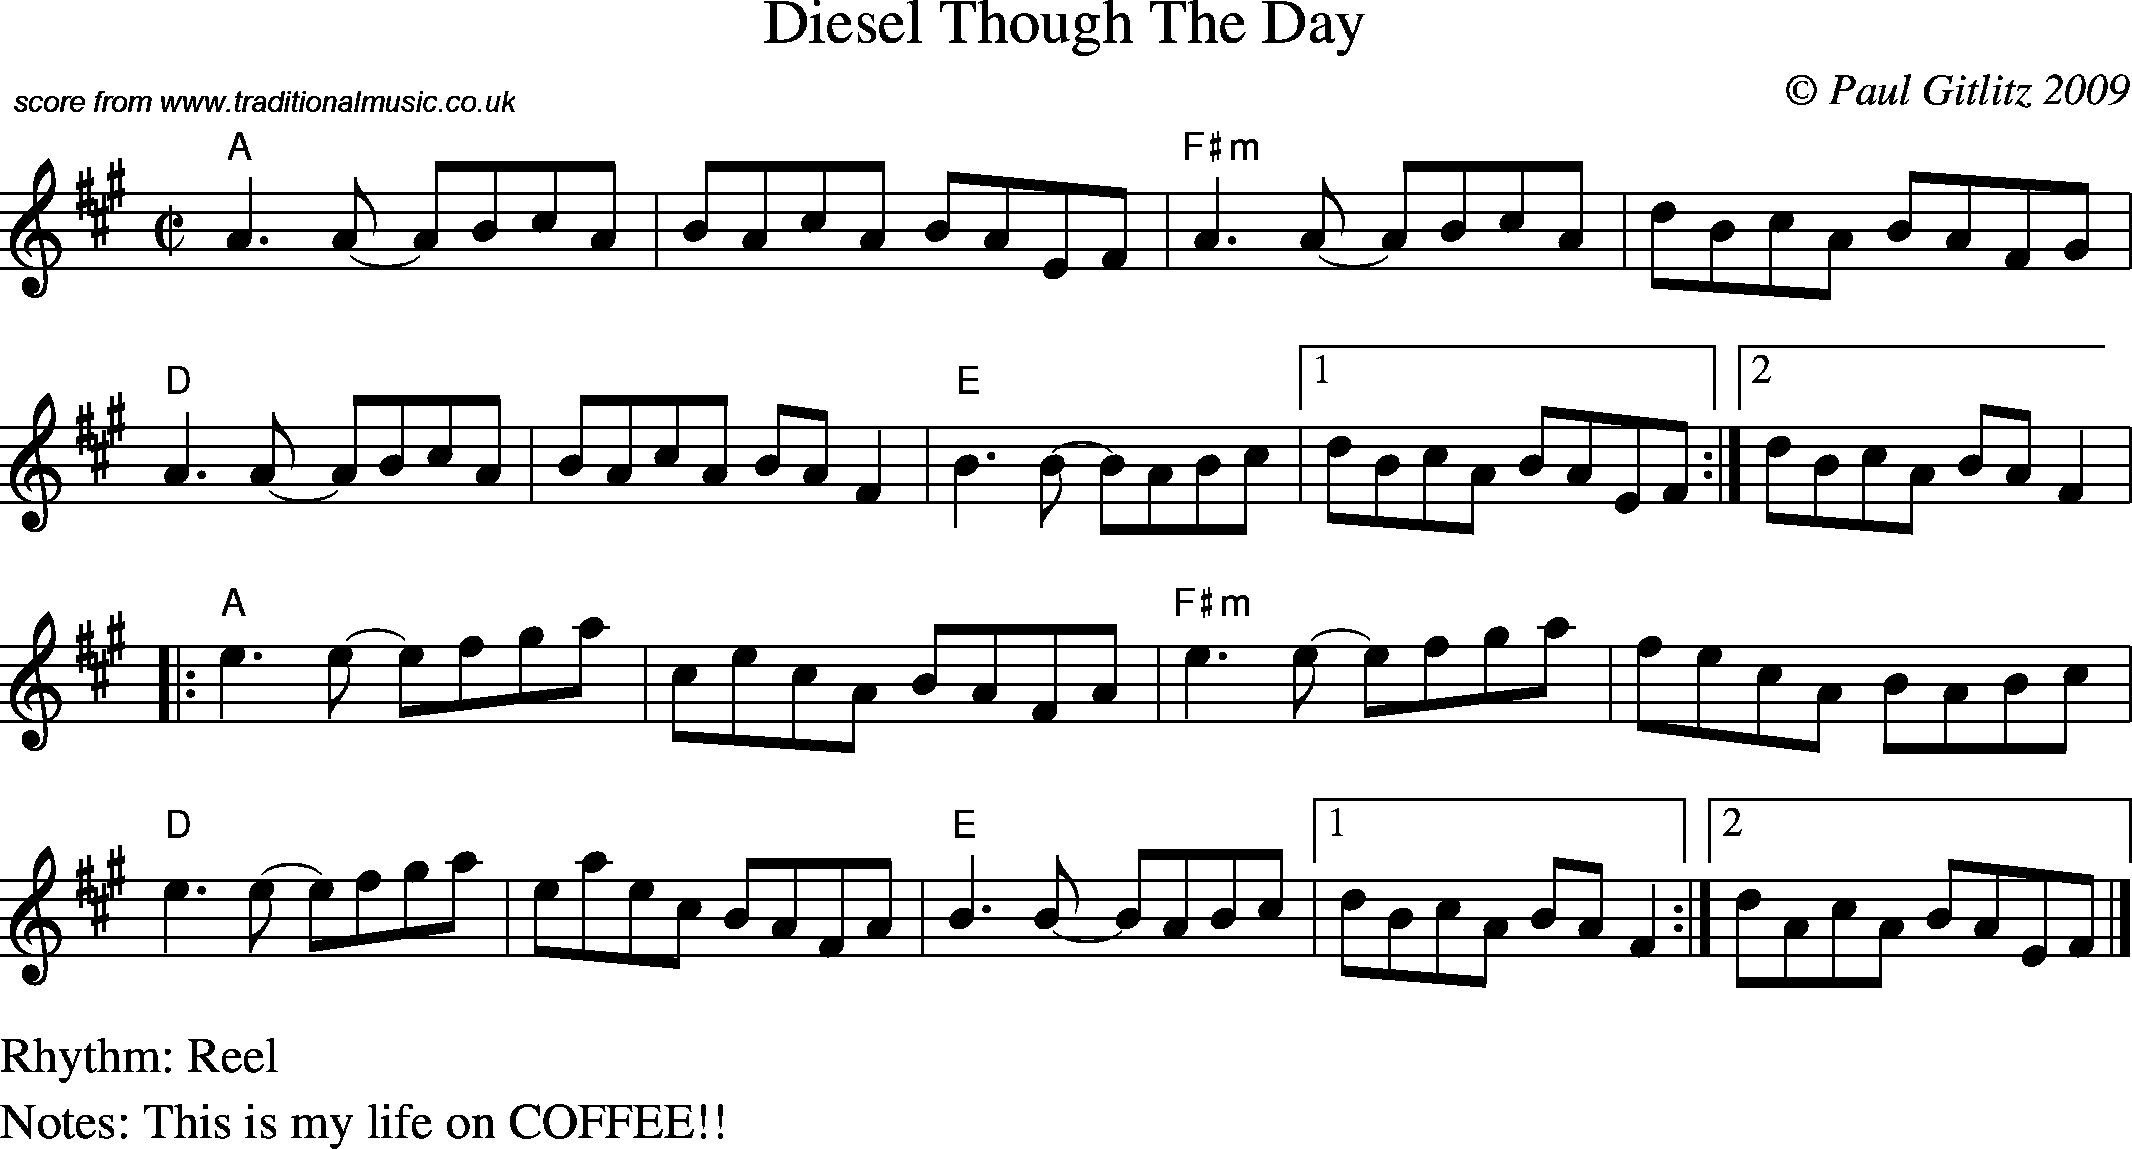 Sheet Music Score for Reel - Diesel Though The Day